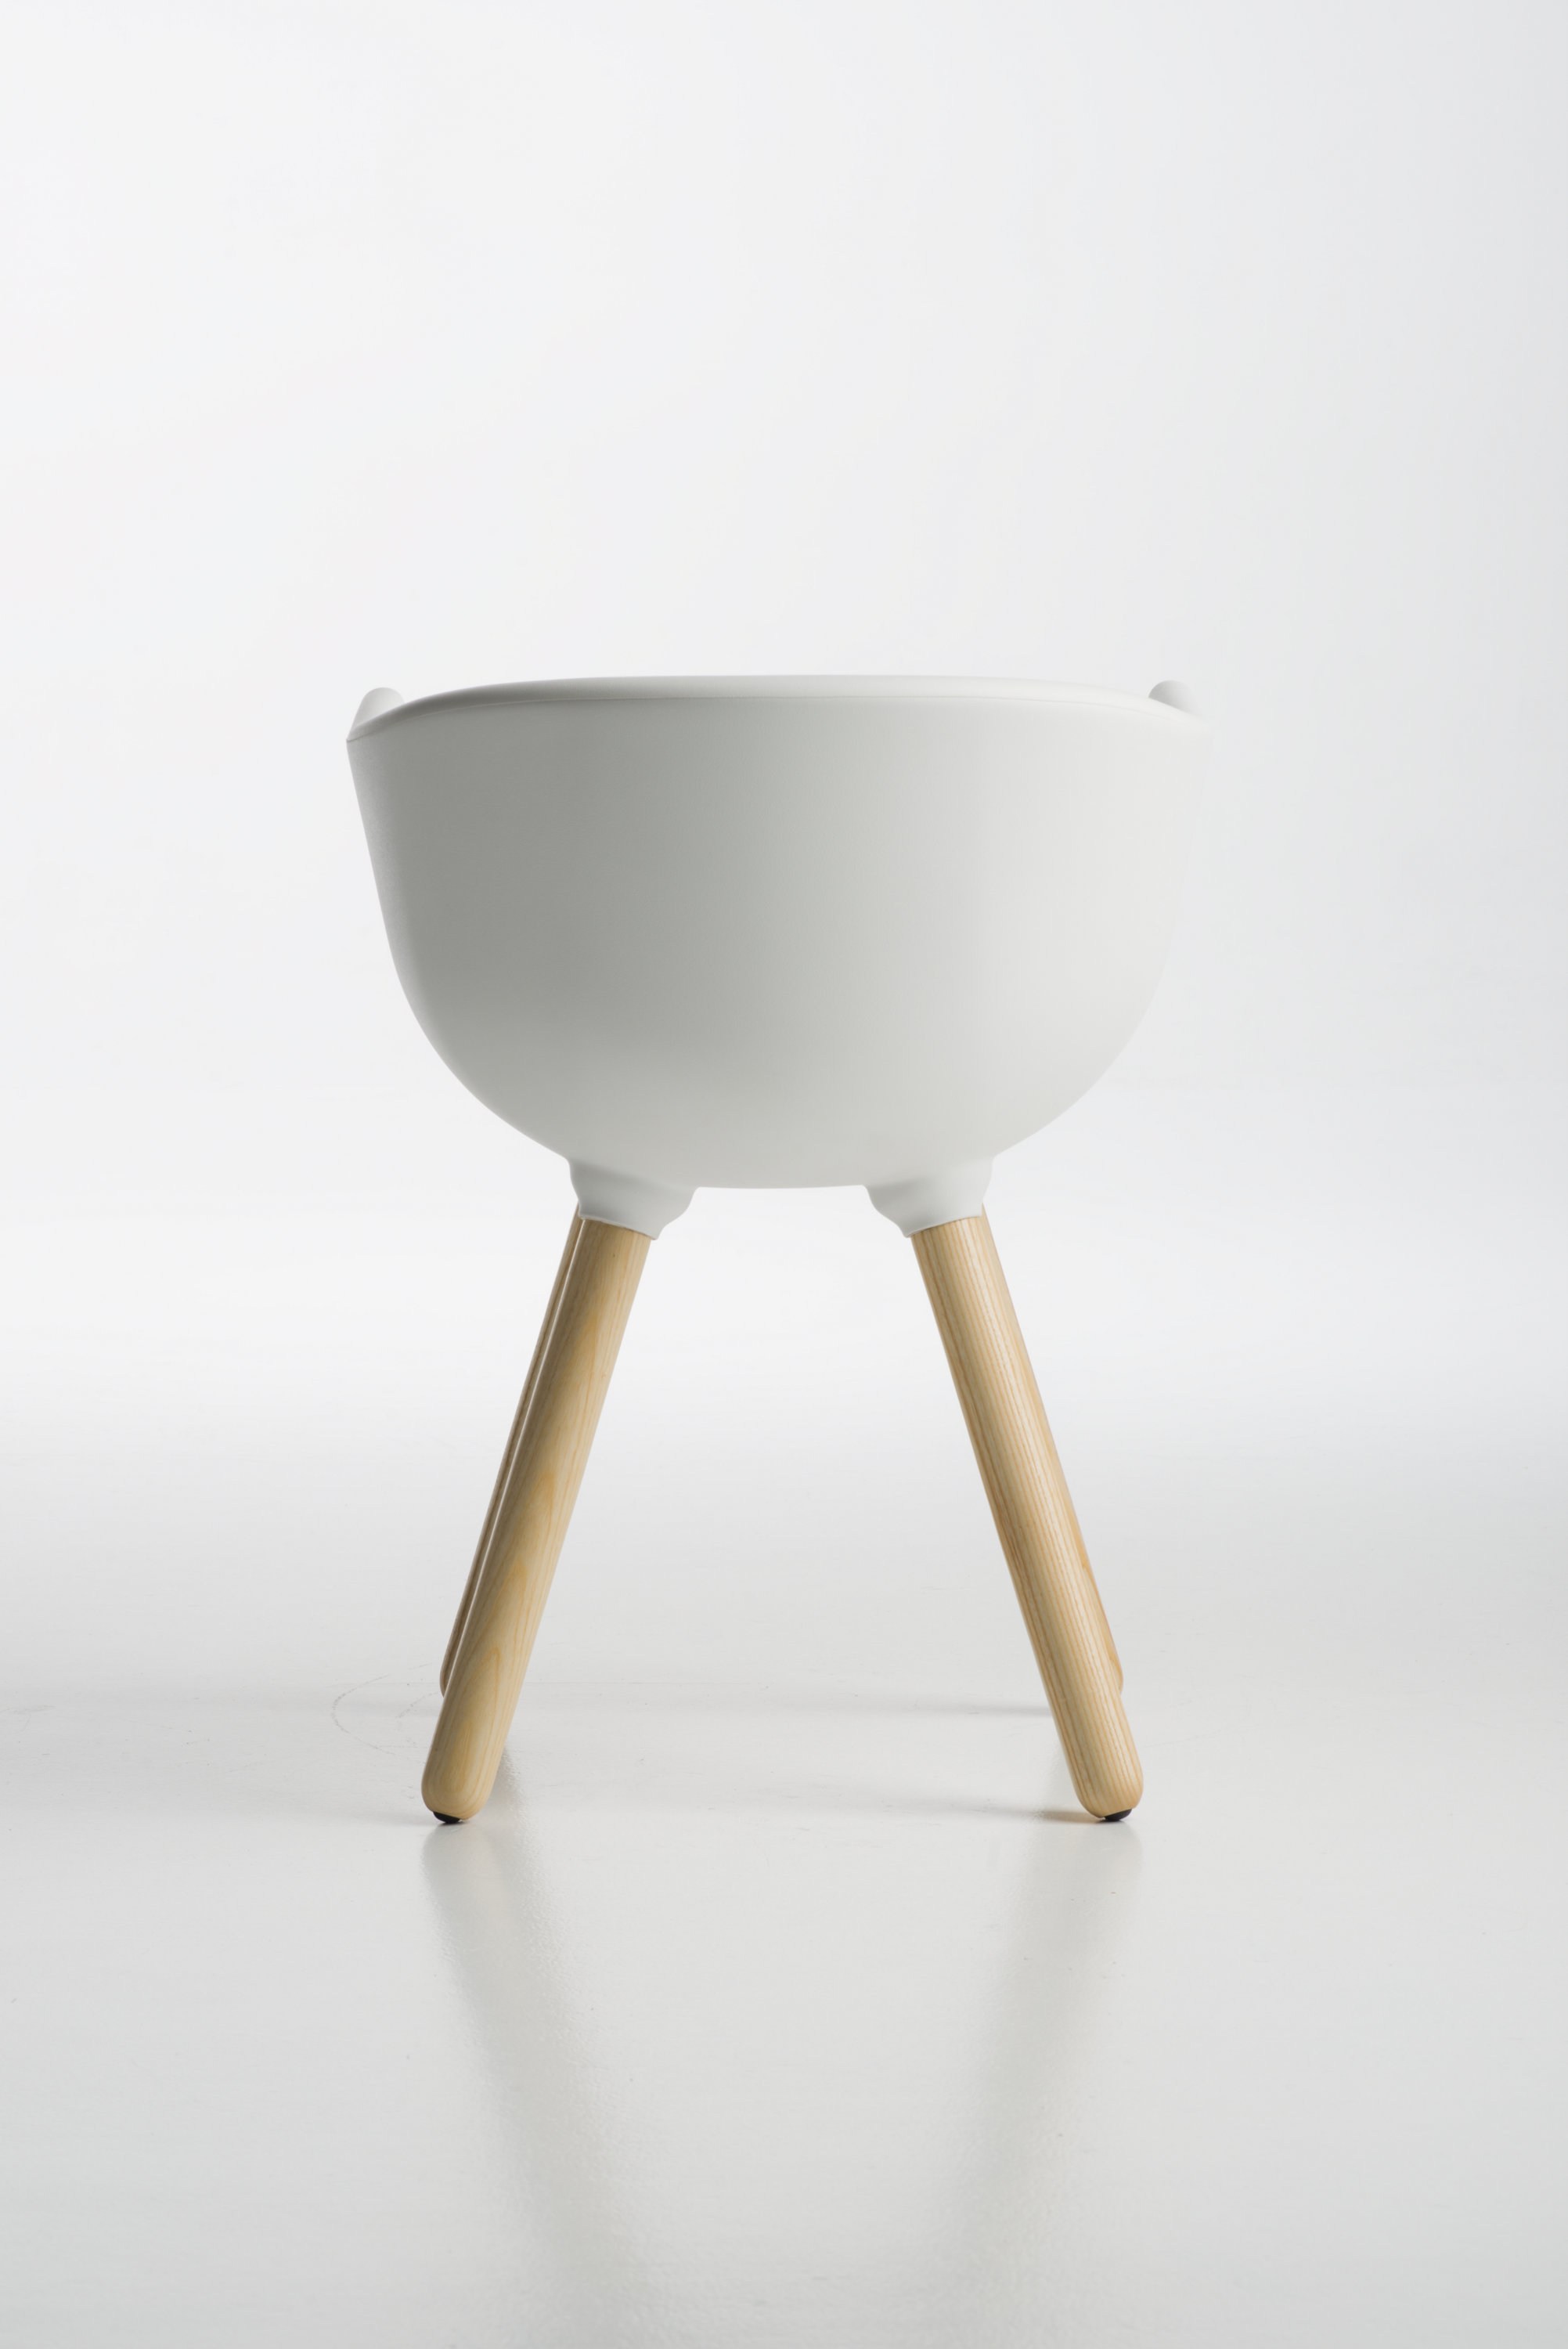 Tulip Small Chair by Kazuko Okamoto for Chairs & More